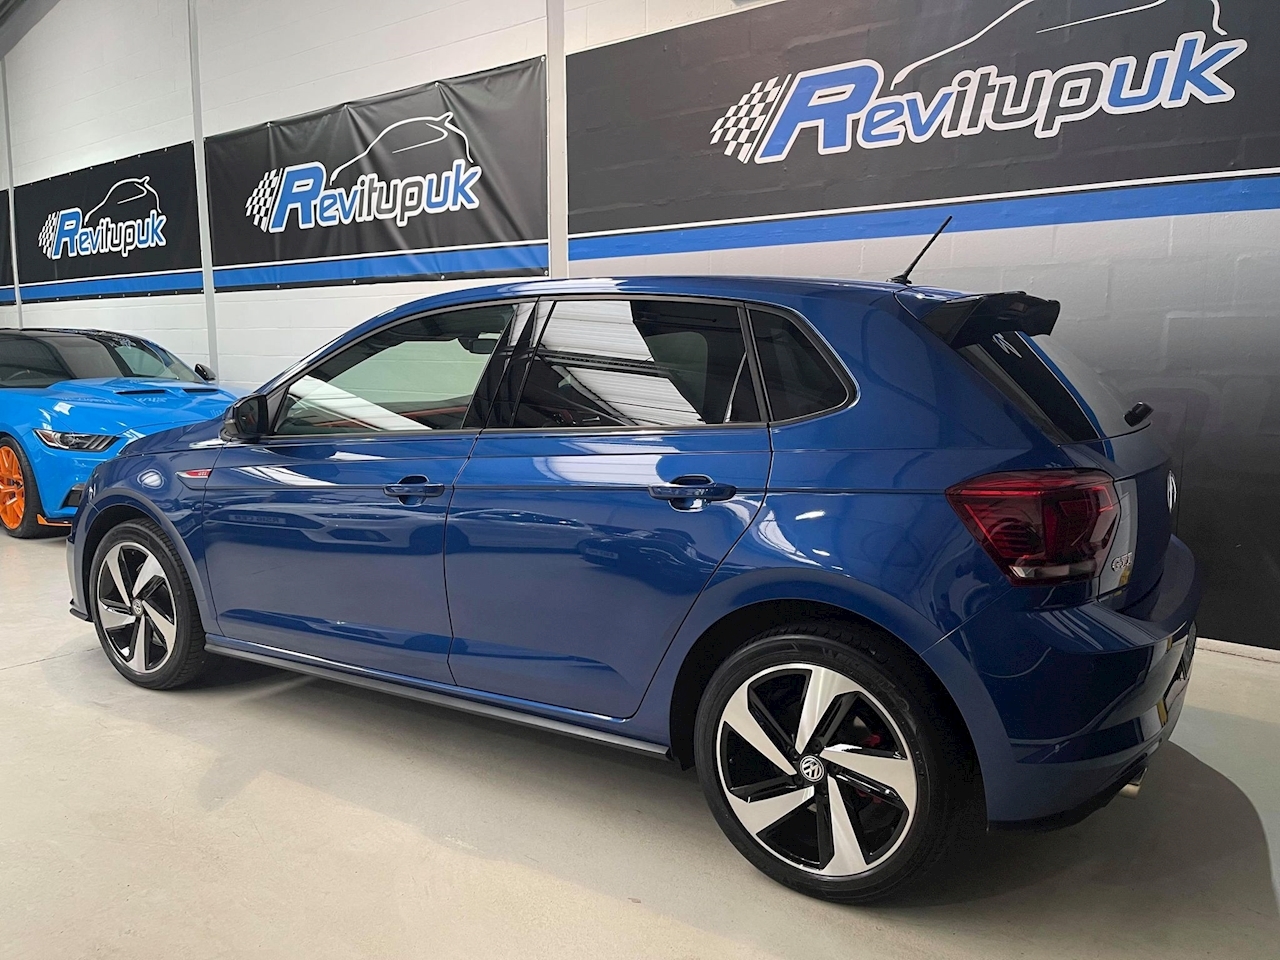 2019 VOLKSWAGEN POLO GTI MRC for sale by auction in Falkirk, Scotland,  United Kingdom